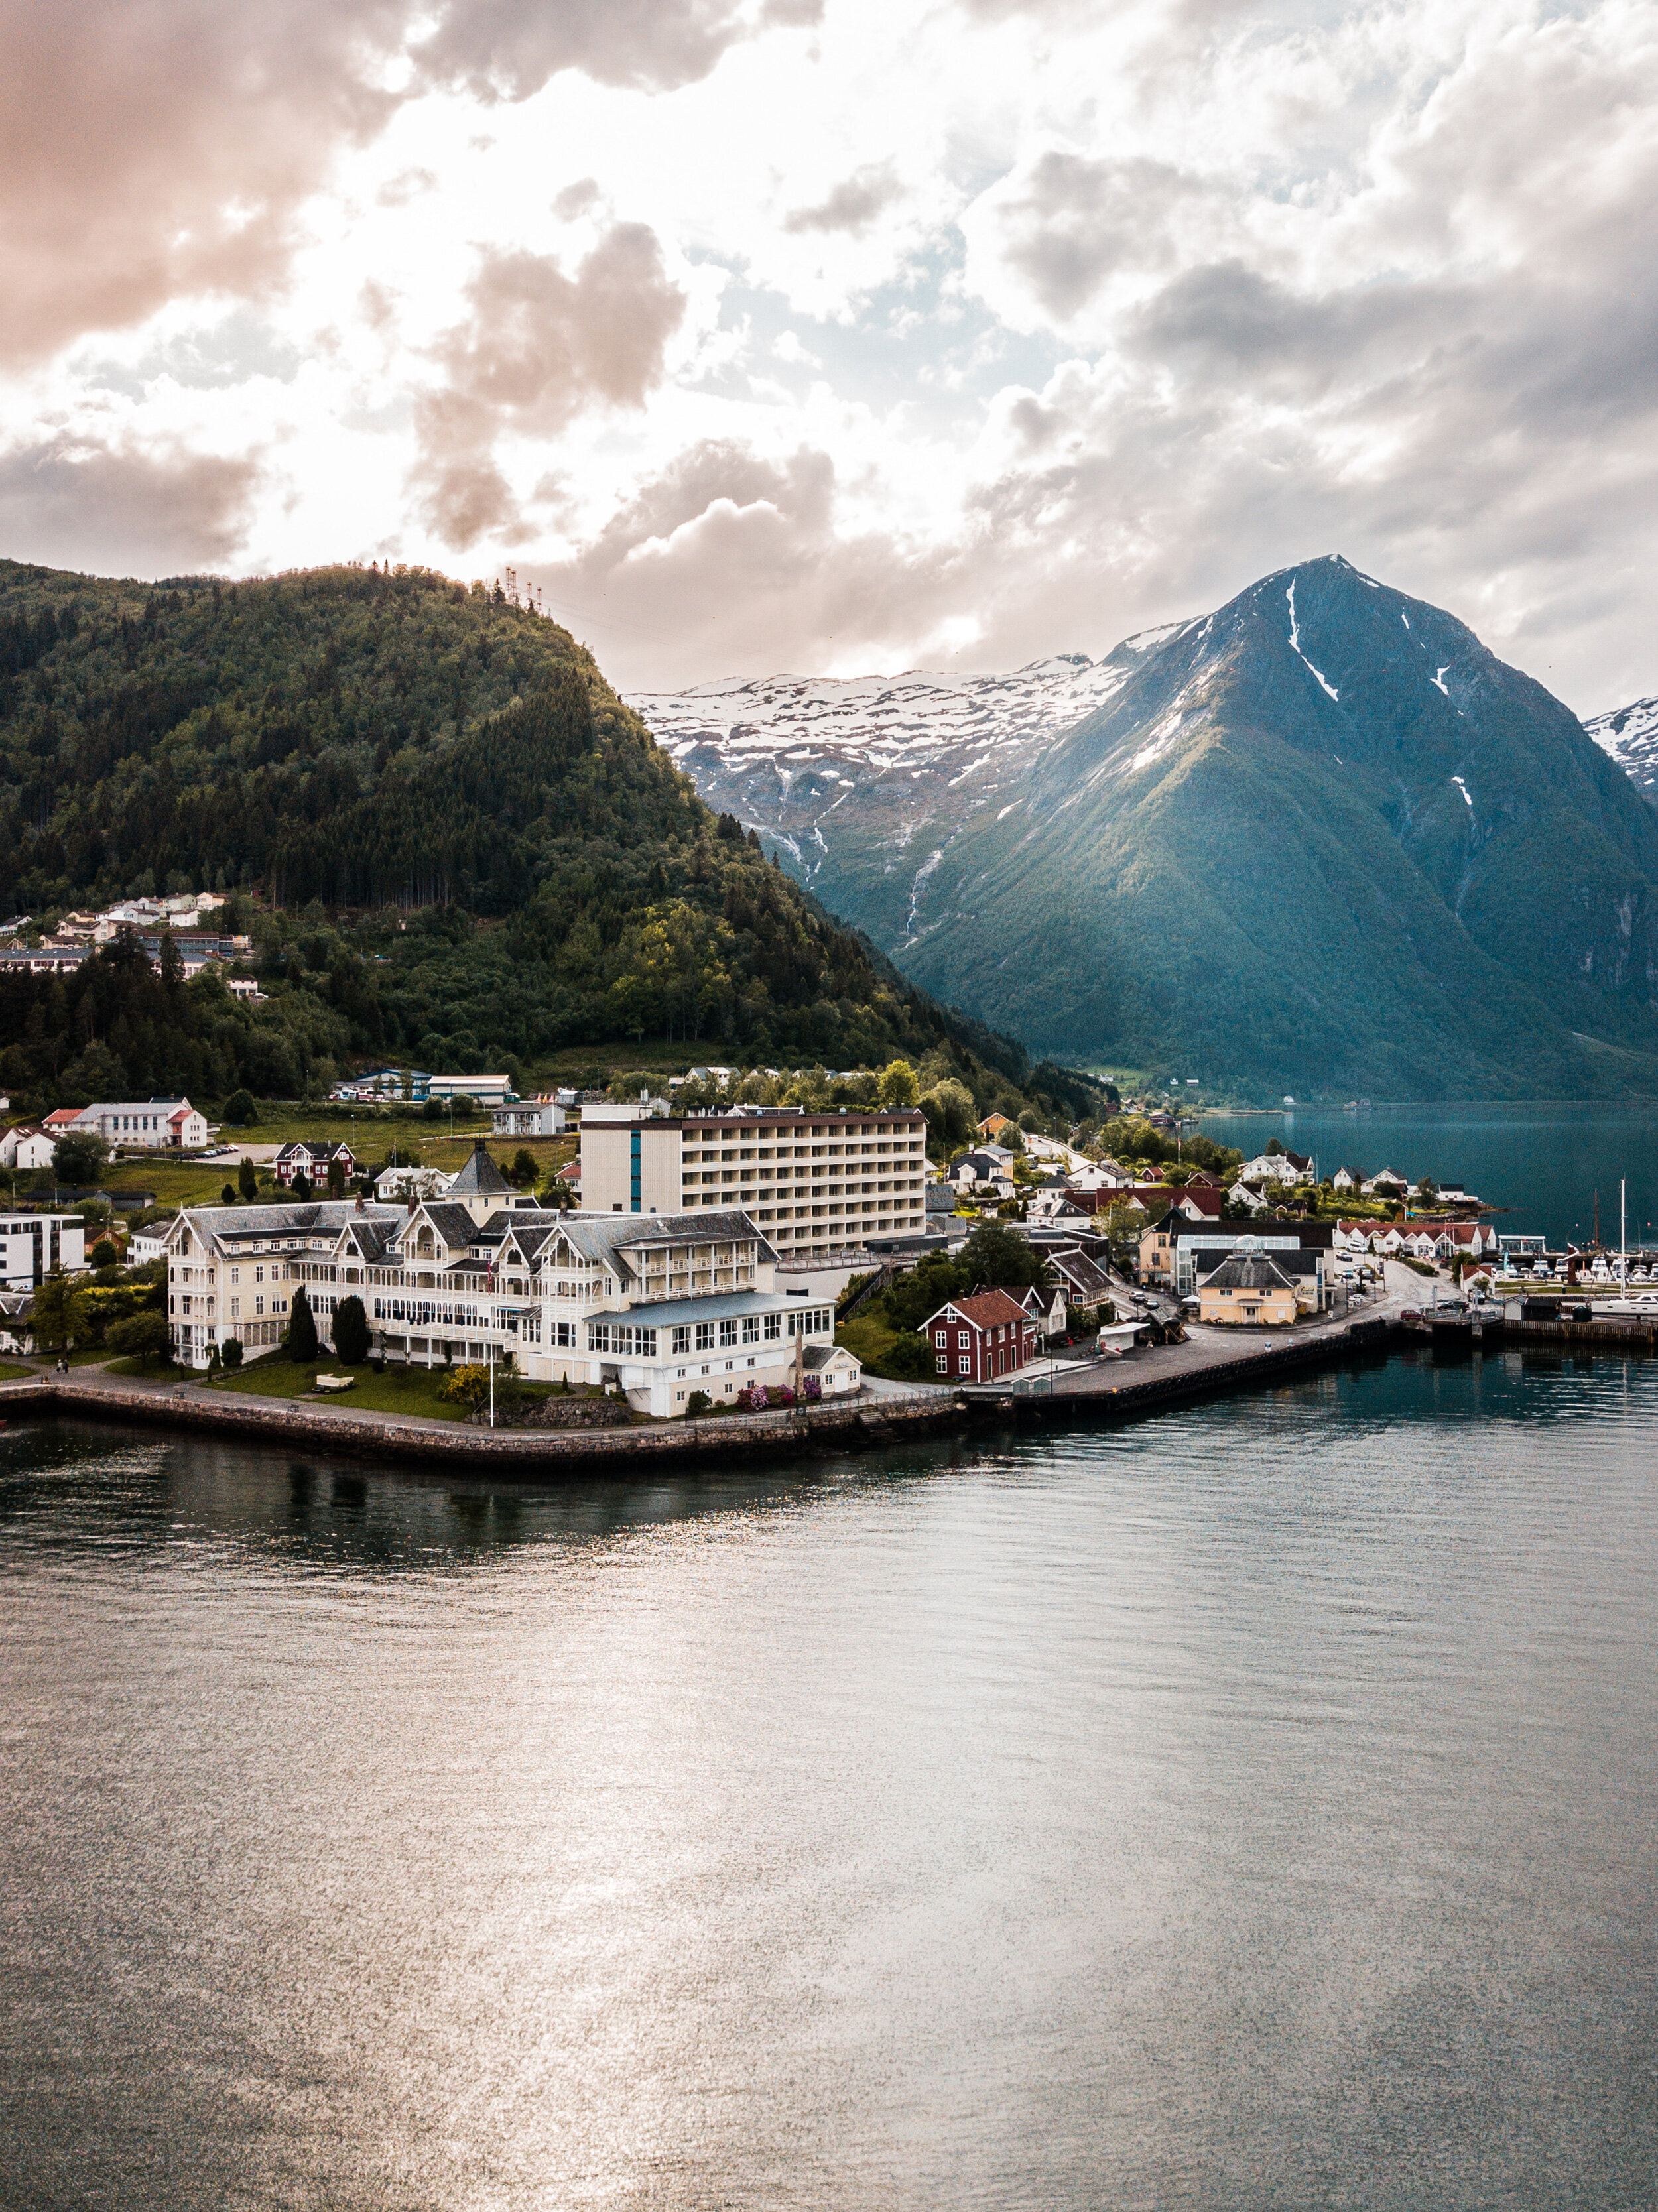 Welcome to the new season at Kviknes hotel in Balestrand